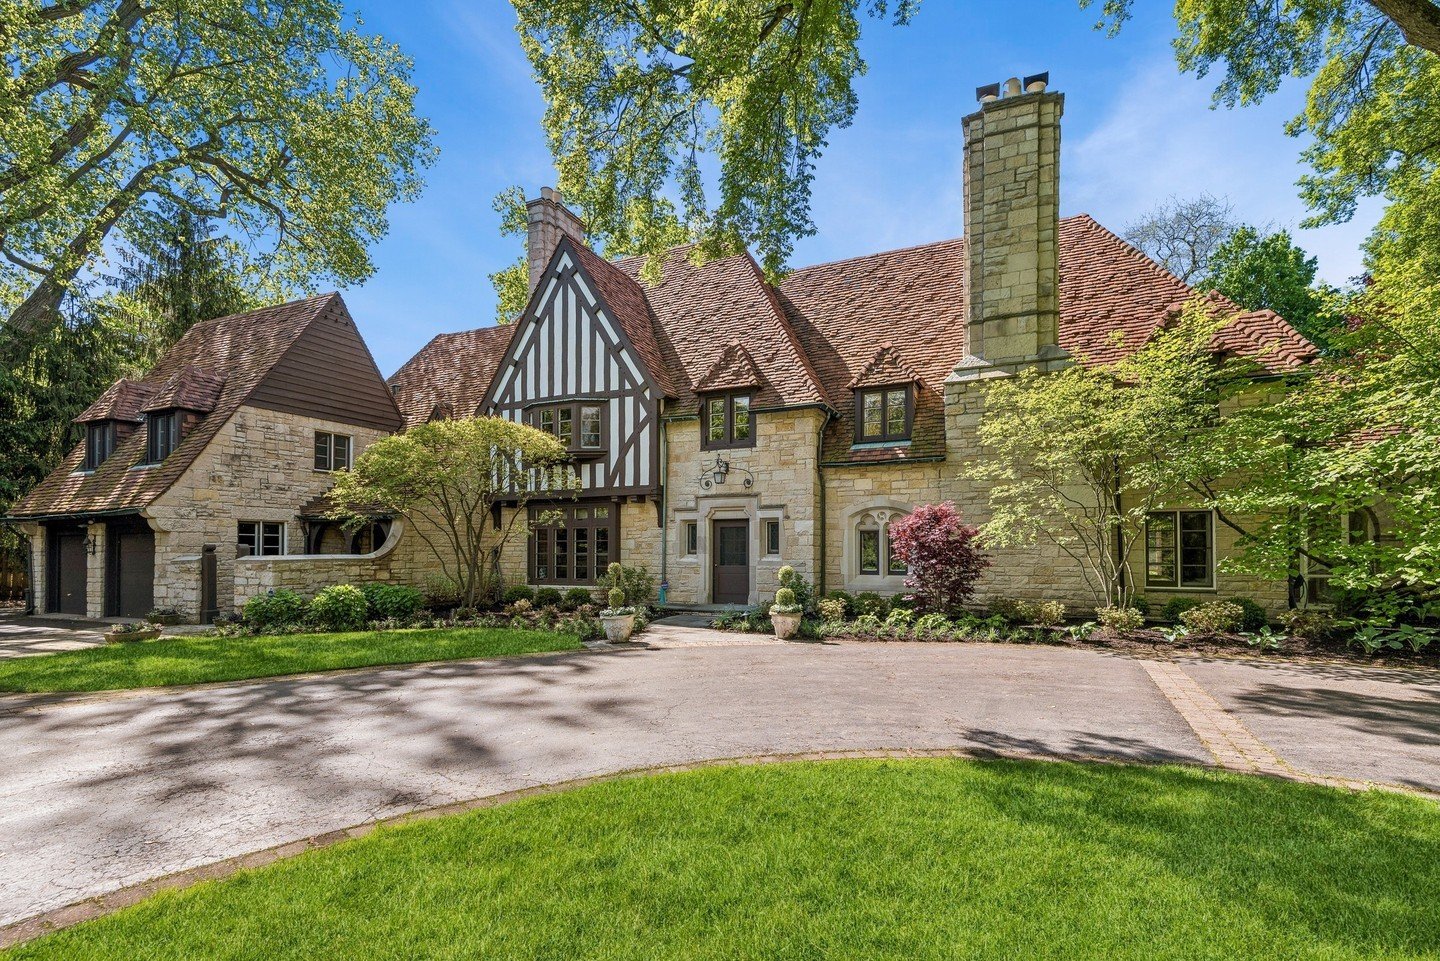 Just Listed in Wilmette!⁠
2743 Illinois Road - $2,850,000⁠
5 bedrooms, 5 1/2 baths, indoor pool, 7,000+ square feet⁠
⁠
Incredible property situated on 1.1 acres!⁠
⁠
Link in bio for more info!⁠
⁠
#wilmette #wilmetterealestate #winnetka #kenilworth #ne